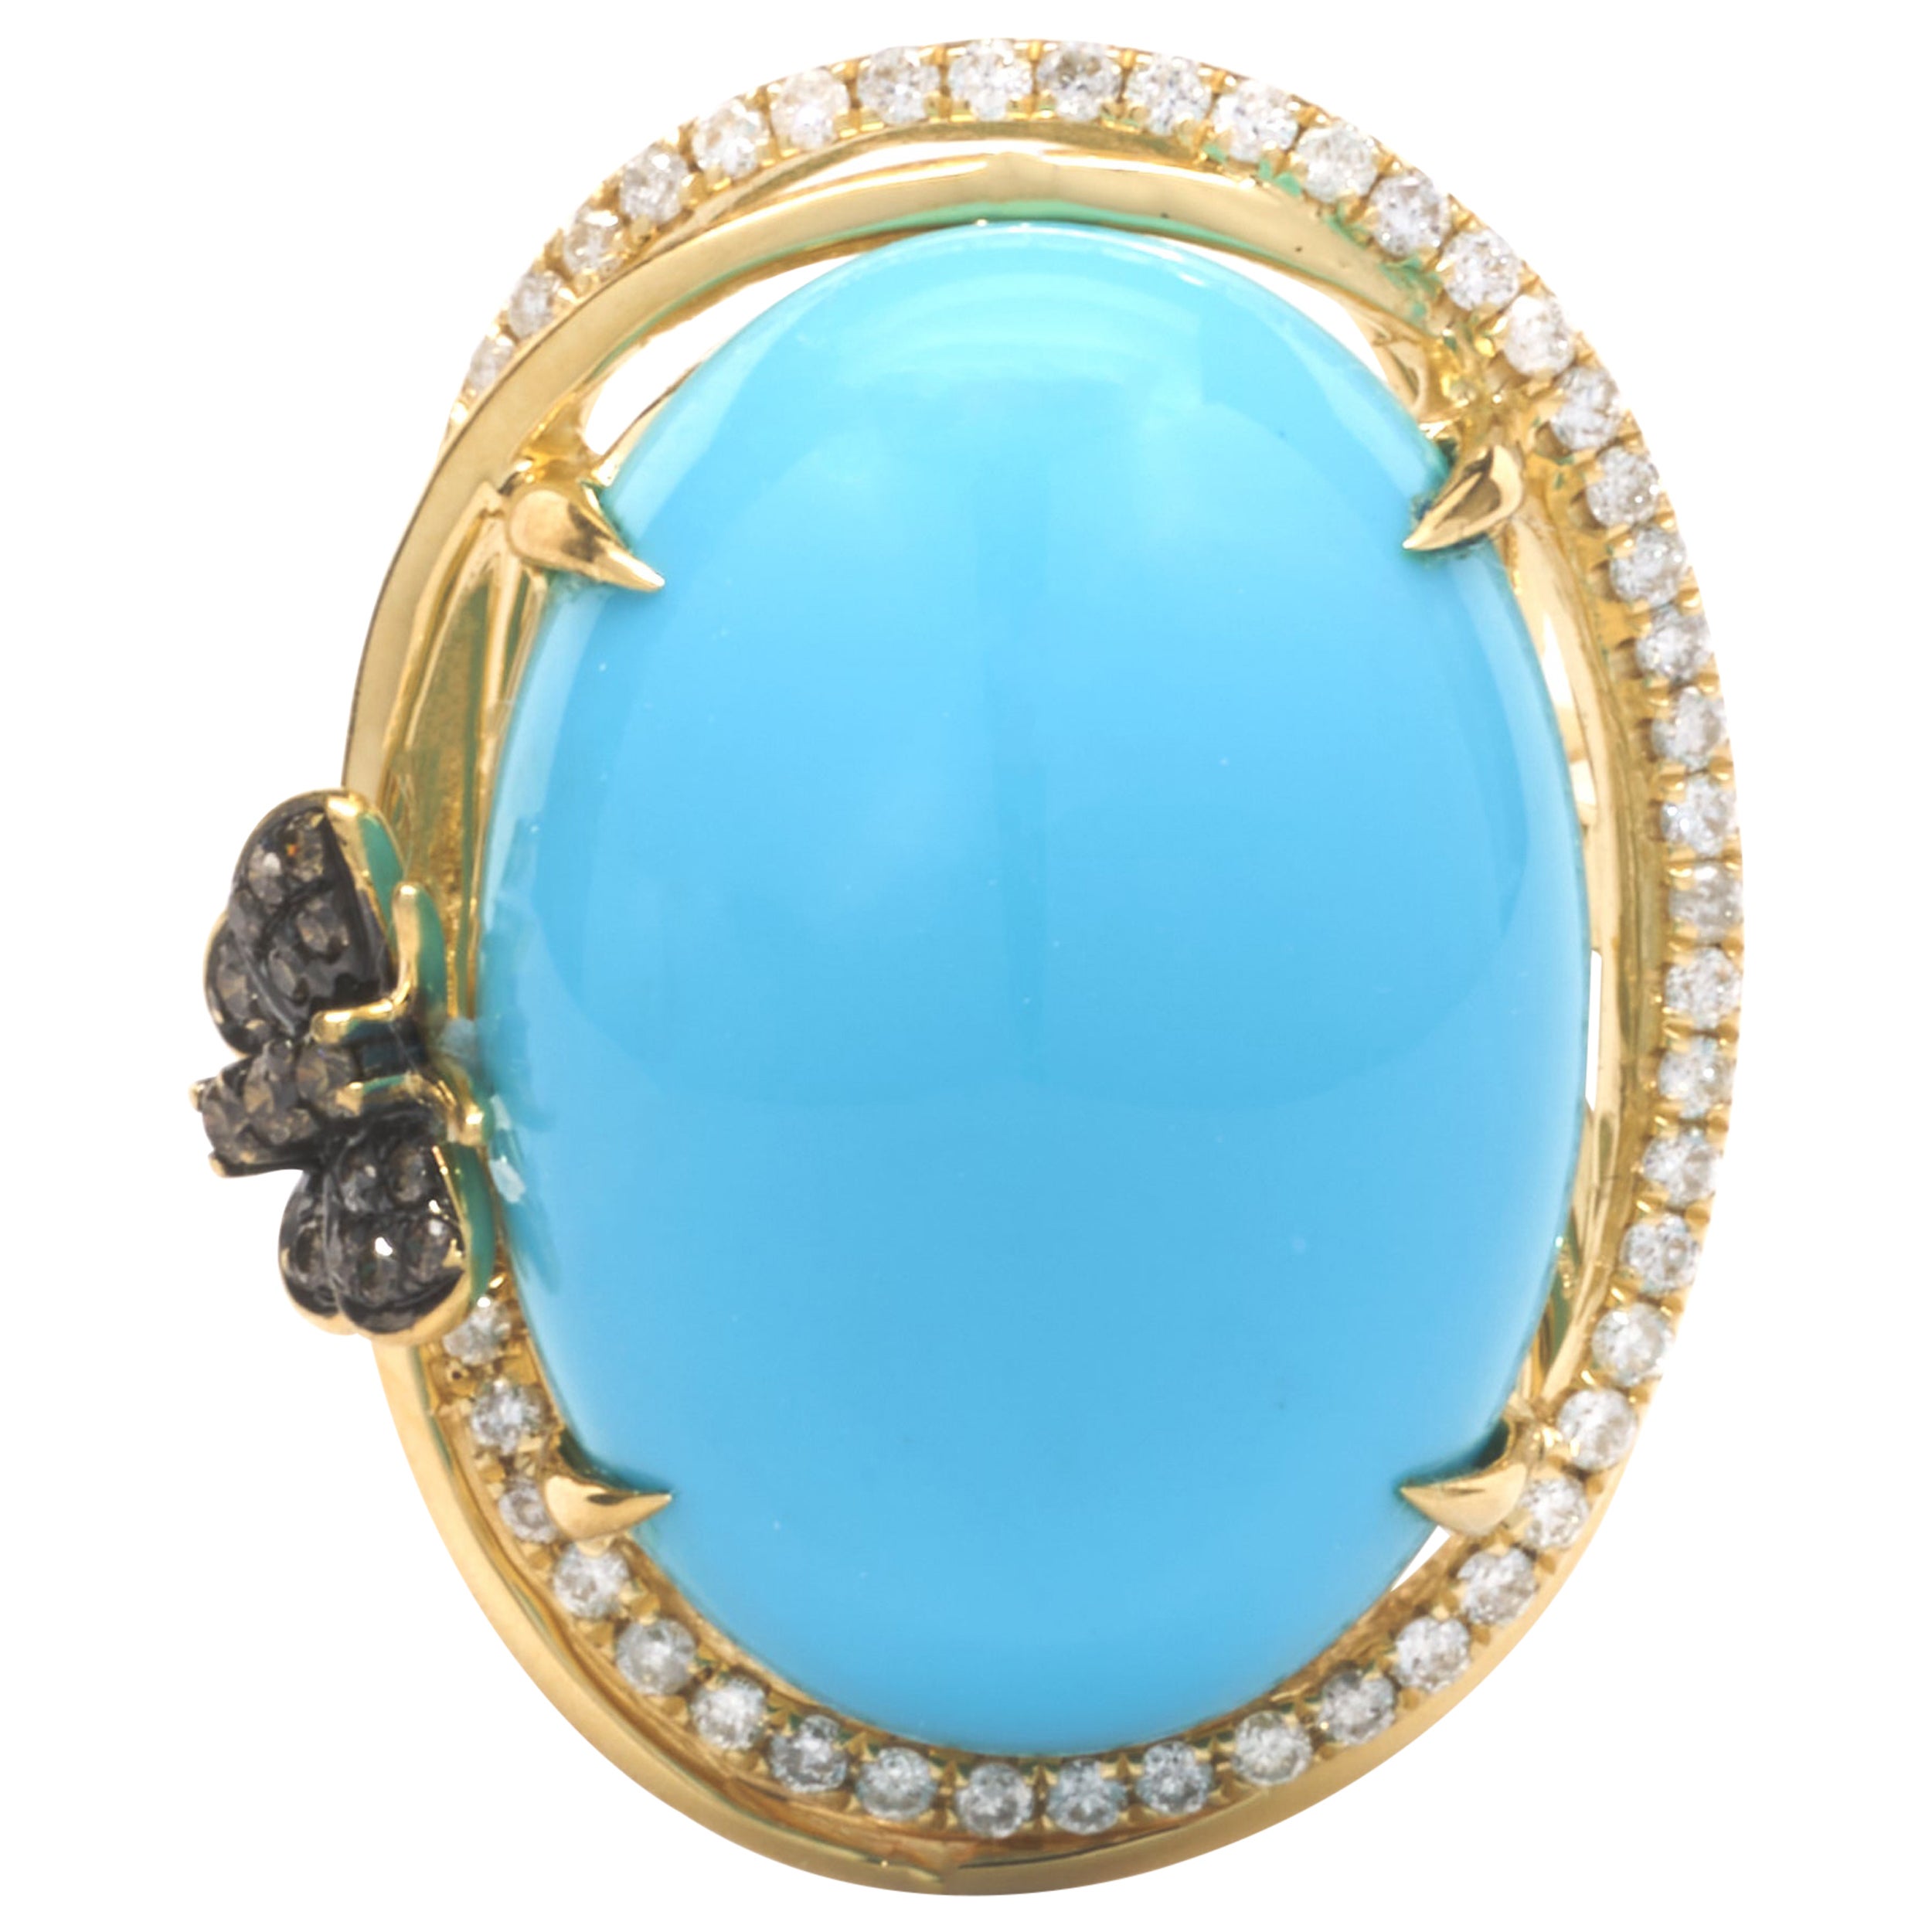 14 Karat Yellow Gold Sleeping Beauty Turquoise and Diamond Ring with Chocolate D